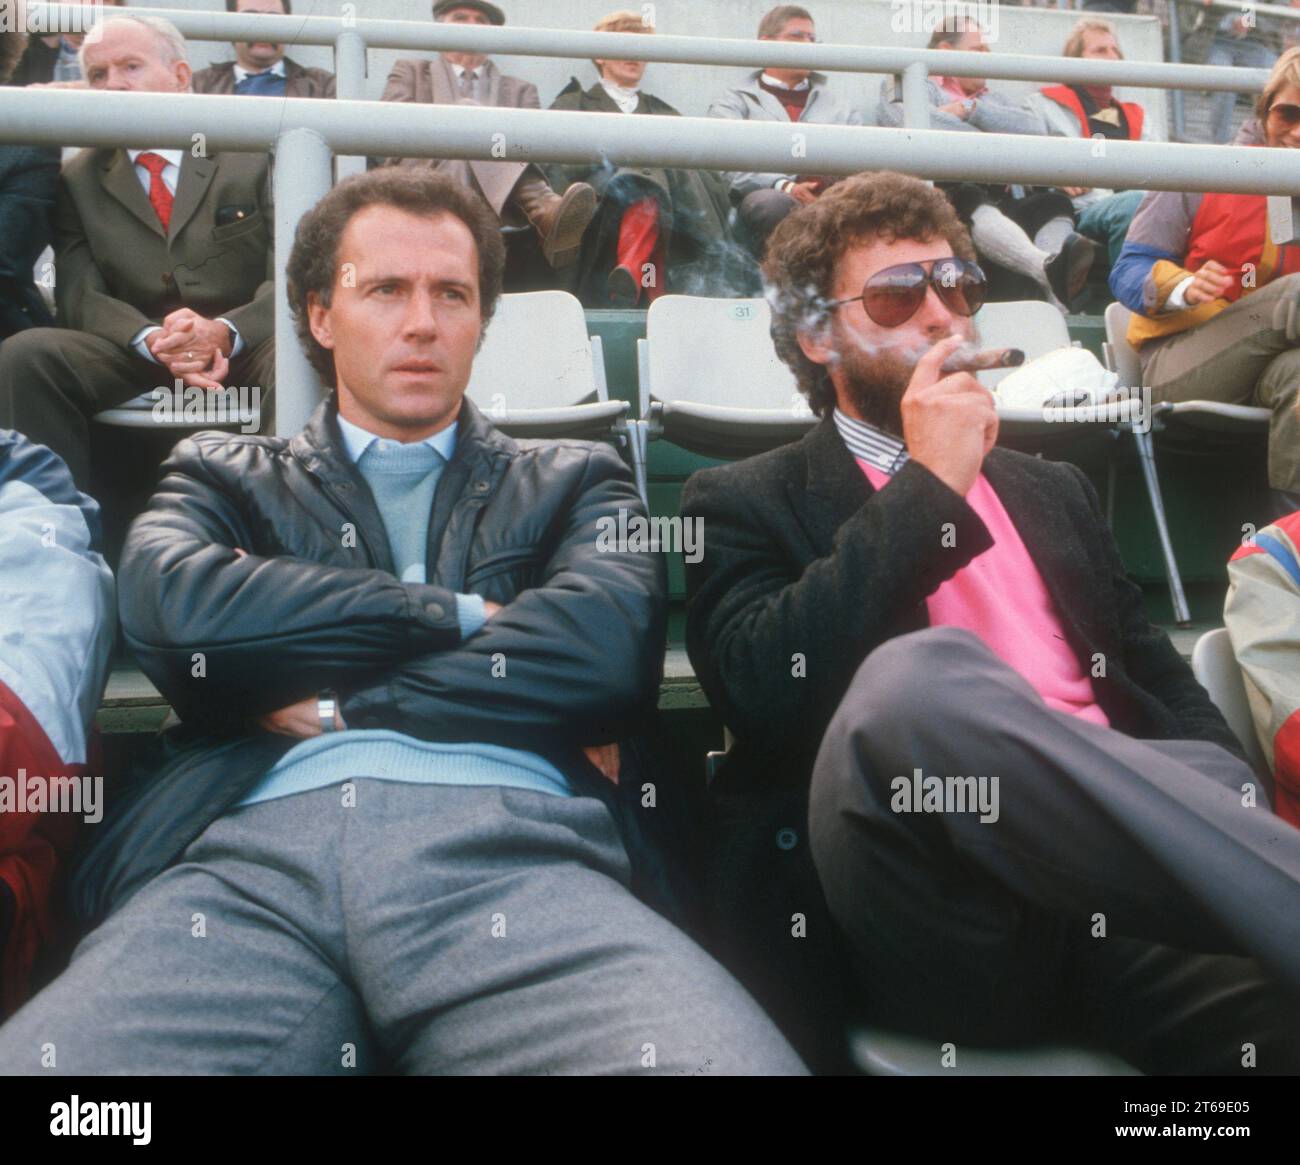 Franz Beckenbauer (left) and Paul Breitner as spectators at the match between FC Bayern München and 1. FC Köln on 22.09.1984. Breitner smoking a cigar [automated translation] Stock Photo